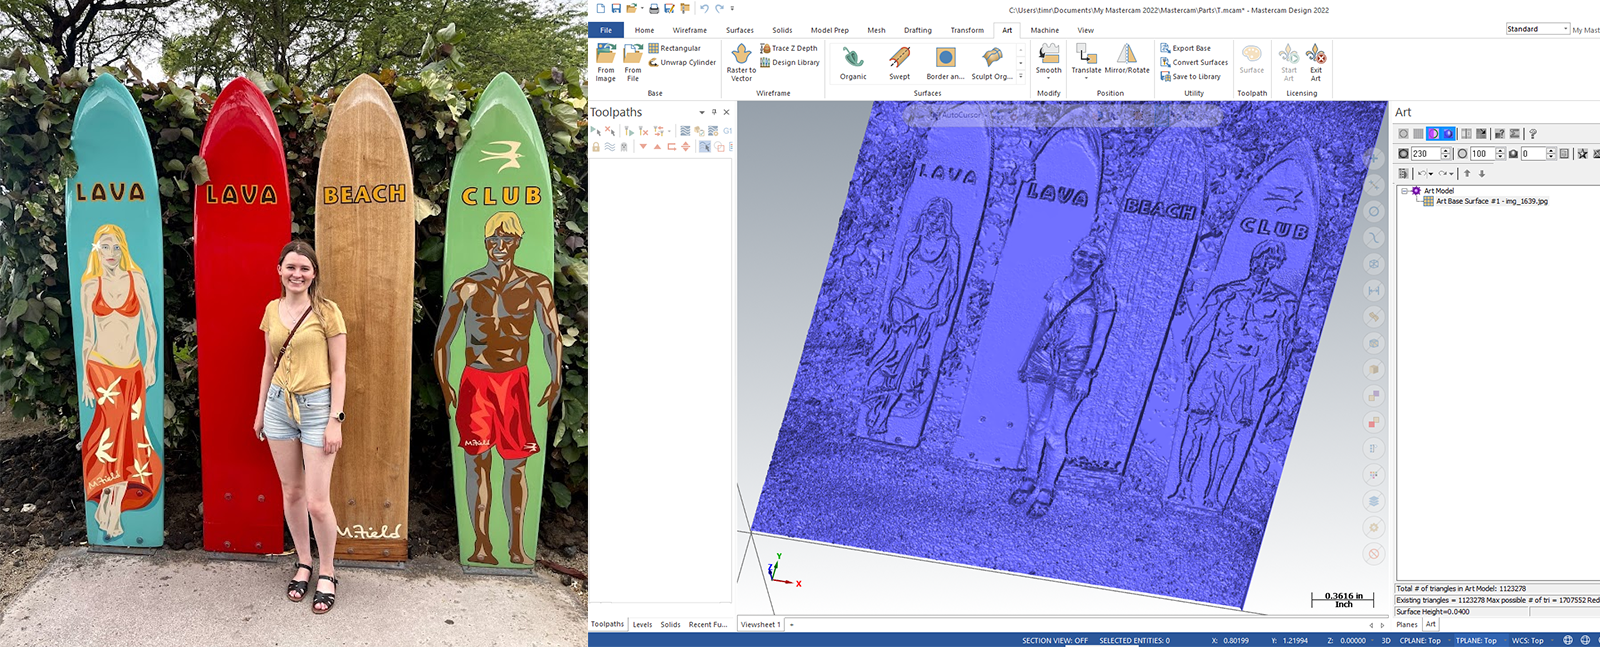 A photo of a woman (Callie Morgan) in front of bleu, red, tan and green painted surfboards and the 3D engraving rendered in dark blue in the application on the right.